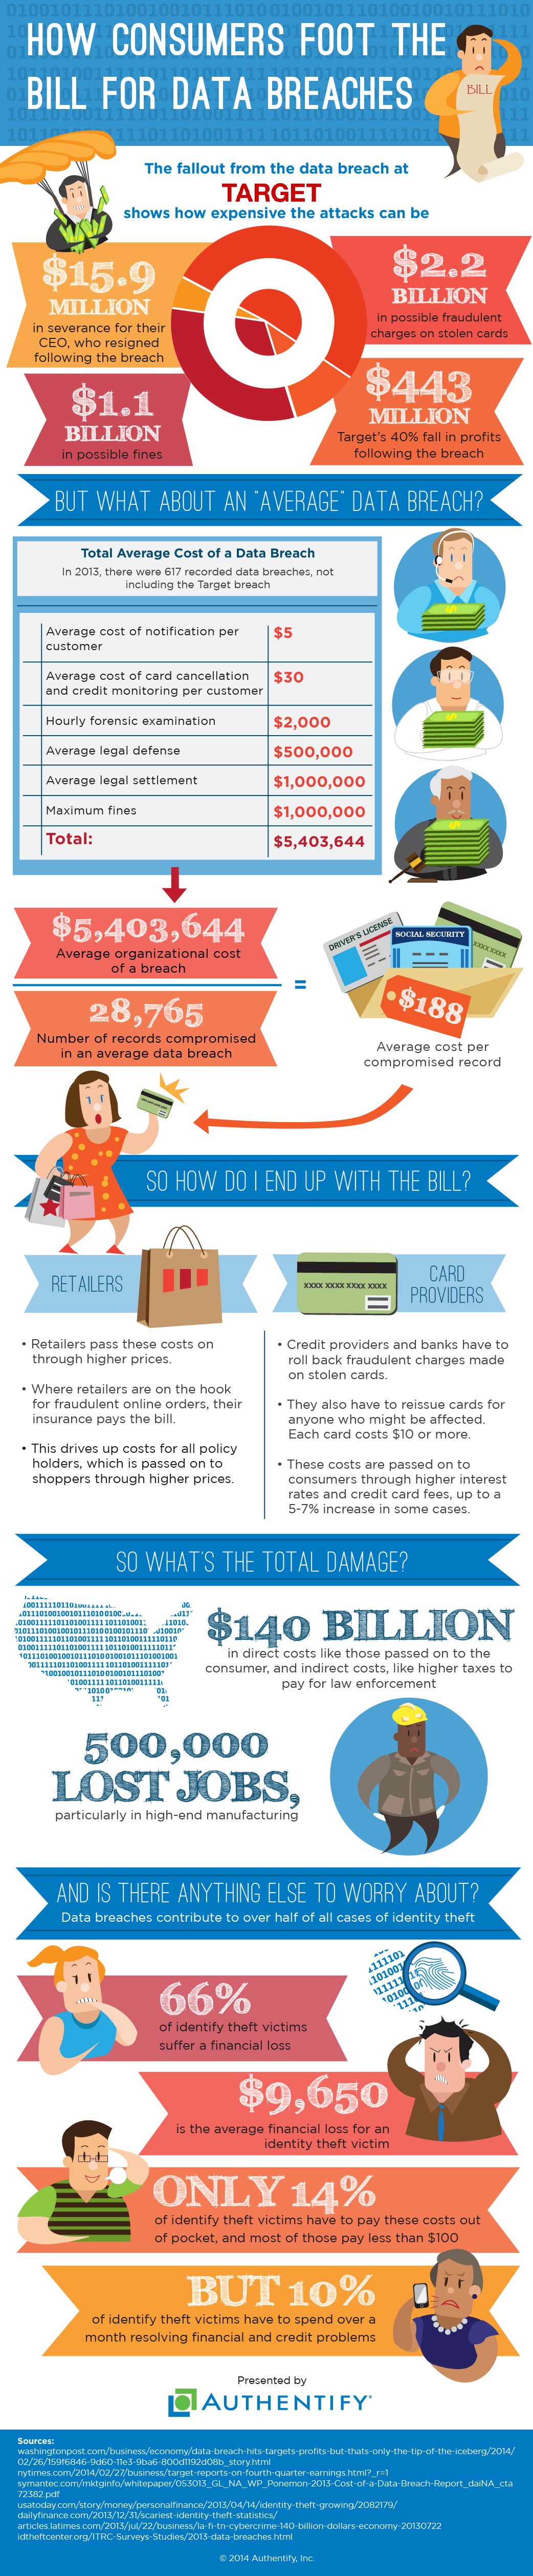 Authentify infographic _target data breaches